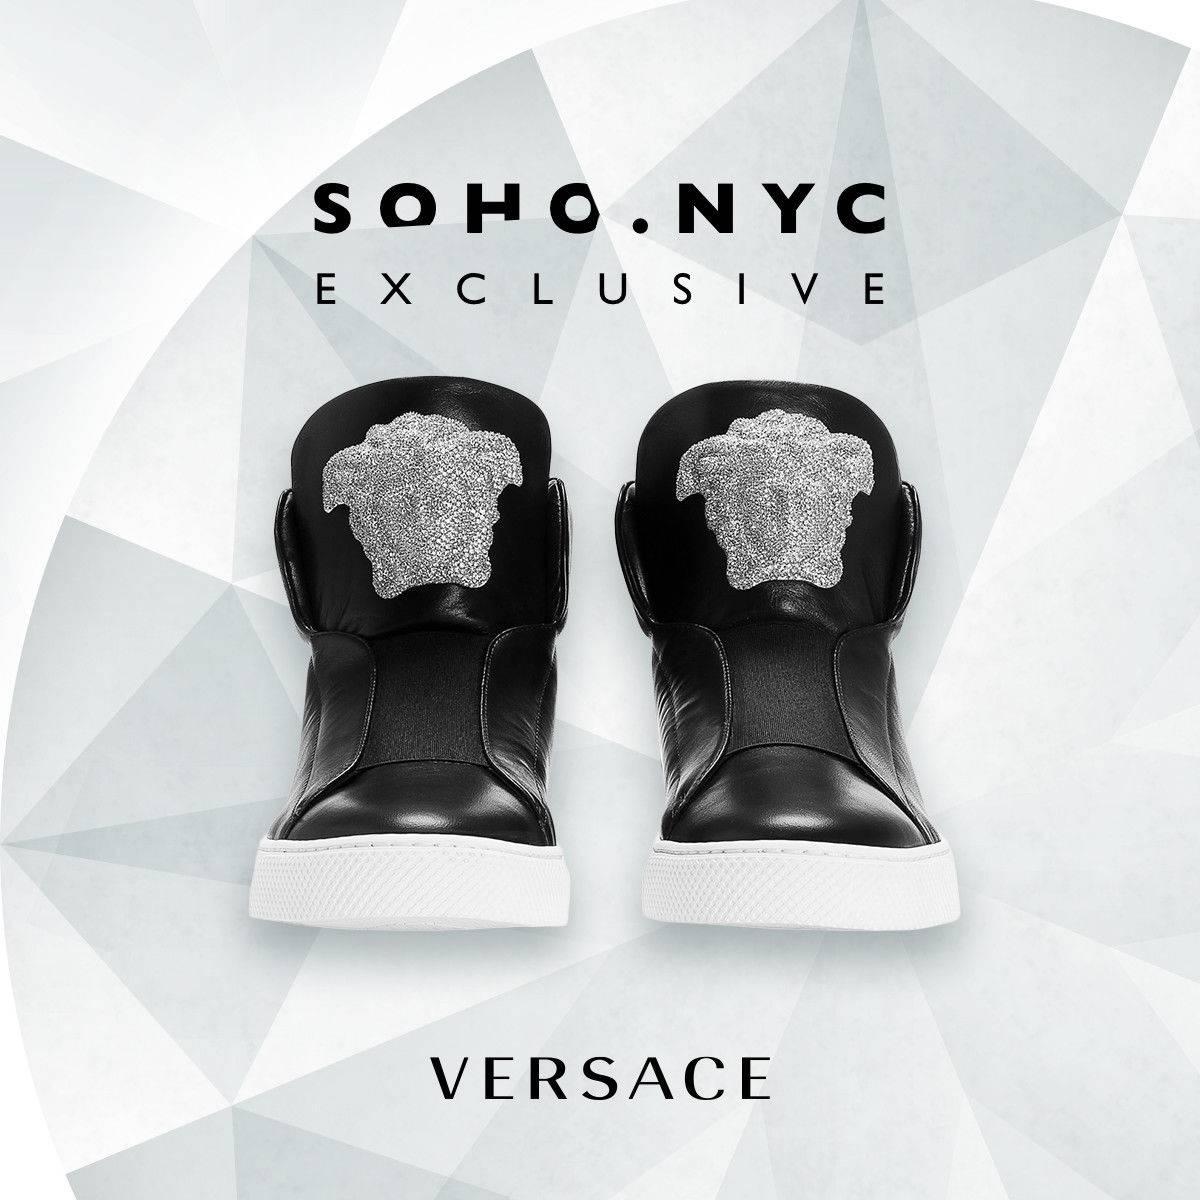 Versace SoHo Exclusive Crystal Embellished Black Leather Sneakers for Men.

Versace’s new SoHo Exclusive Sneaker is pretty much the definition of luxury. Not only is the shoe crafted from the finest calf skin and premium Nappa leather, but also